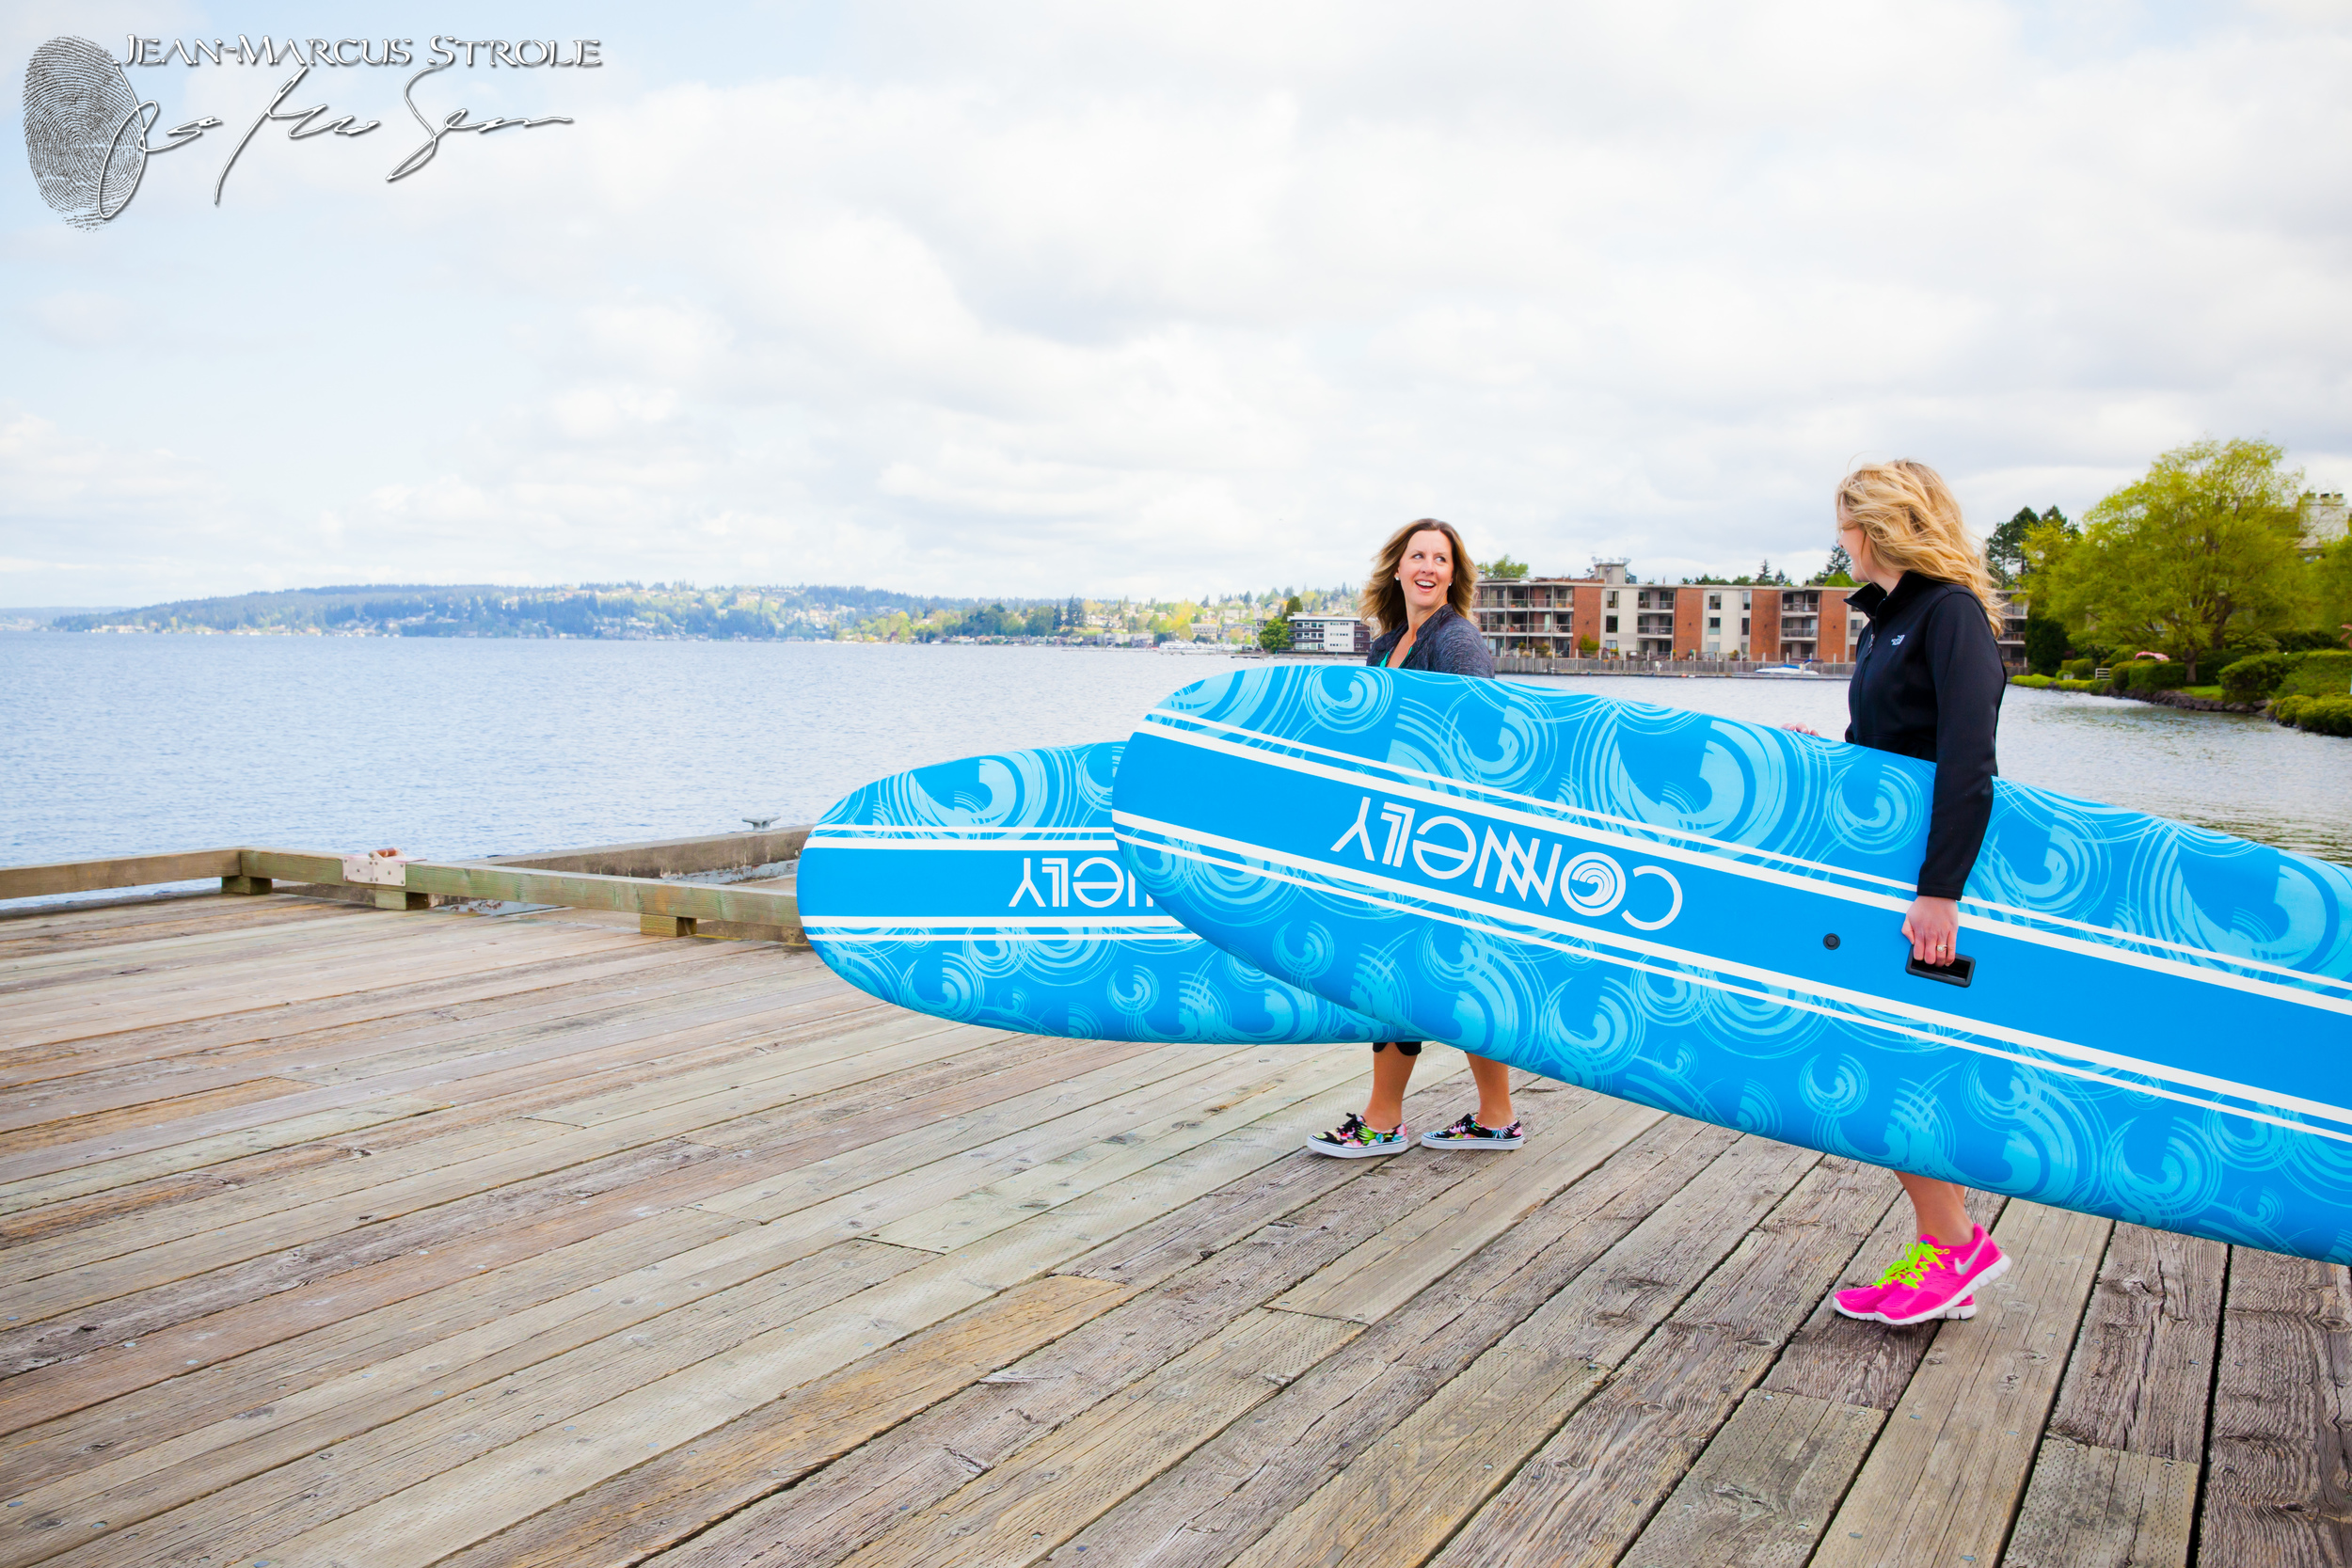 Carillon_Point_Waterfront_Adventures-Jean-Marcus_Strole_Photography-10.jpg